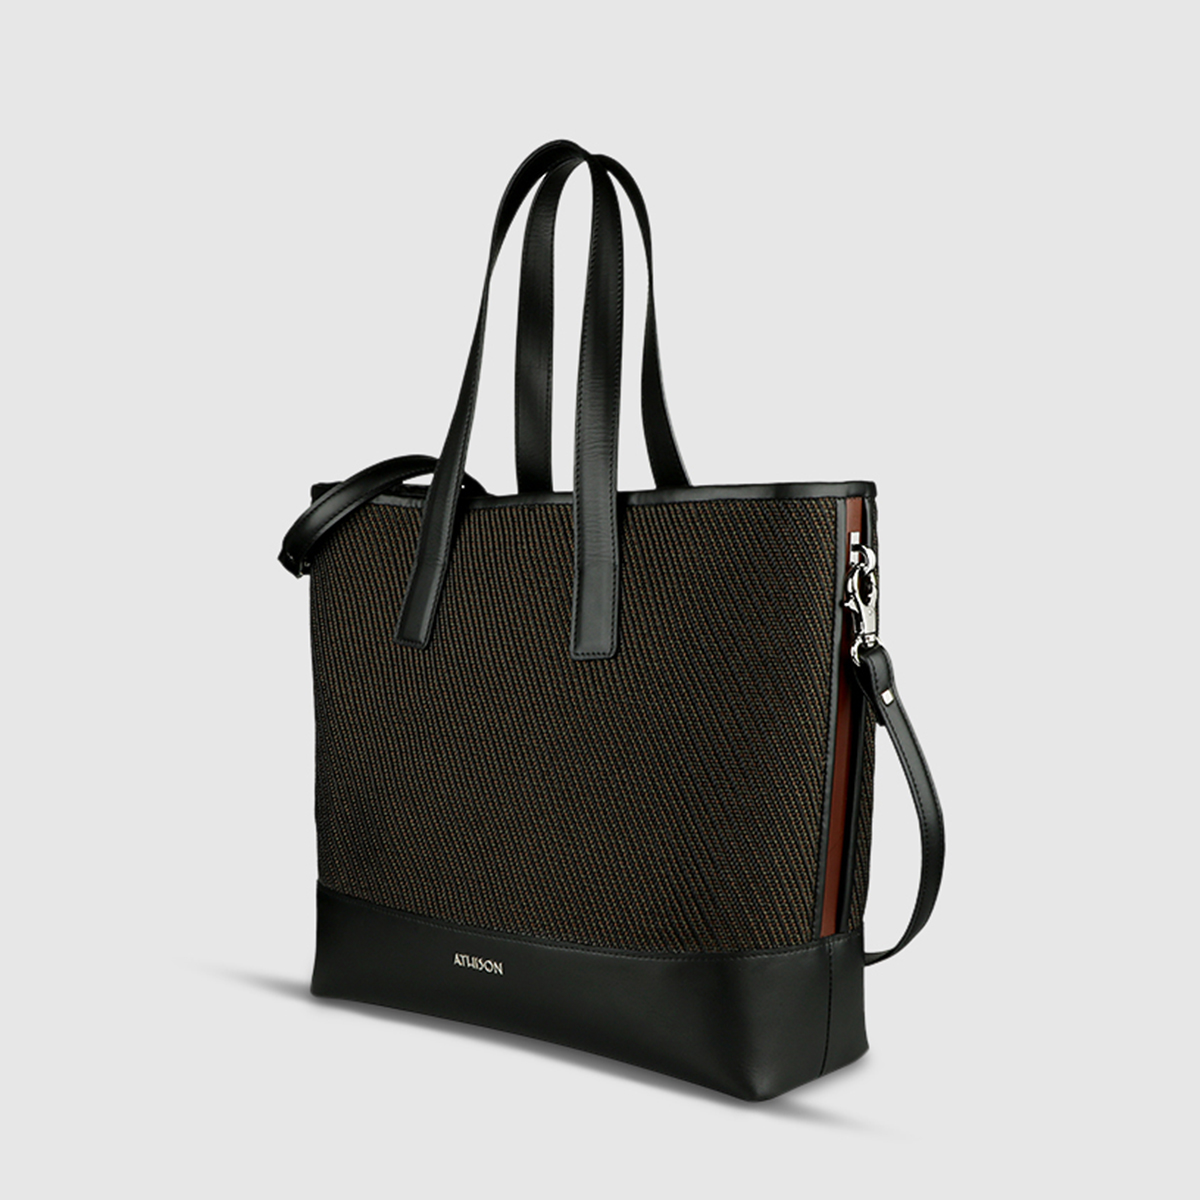 Athison Cotton & Leather Tote Bag Athison on sale 2022 2